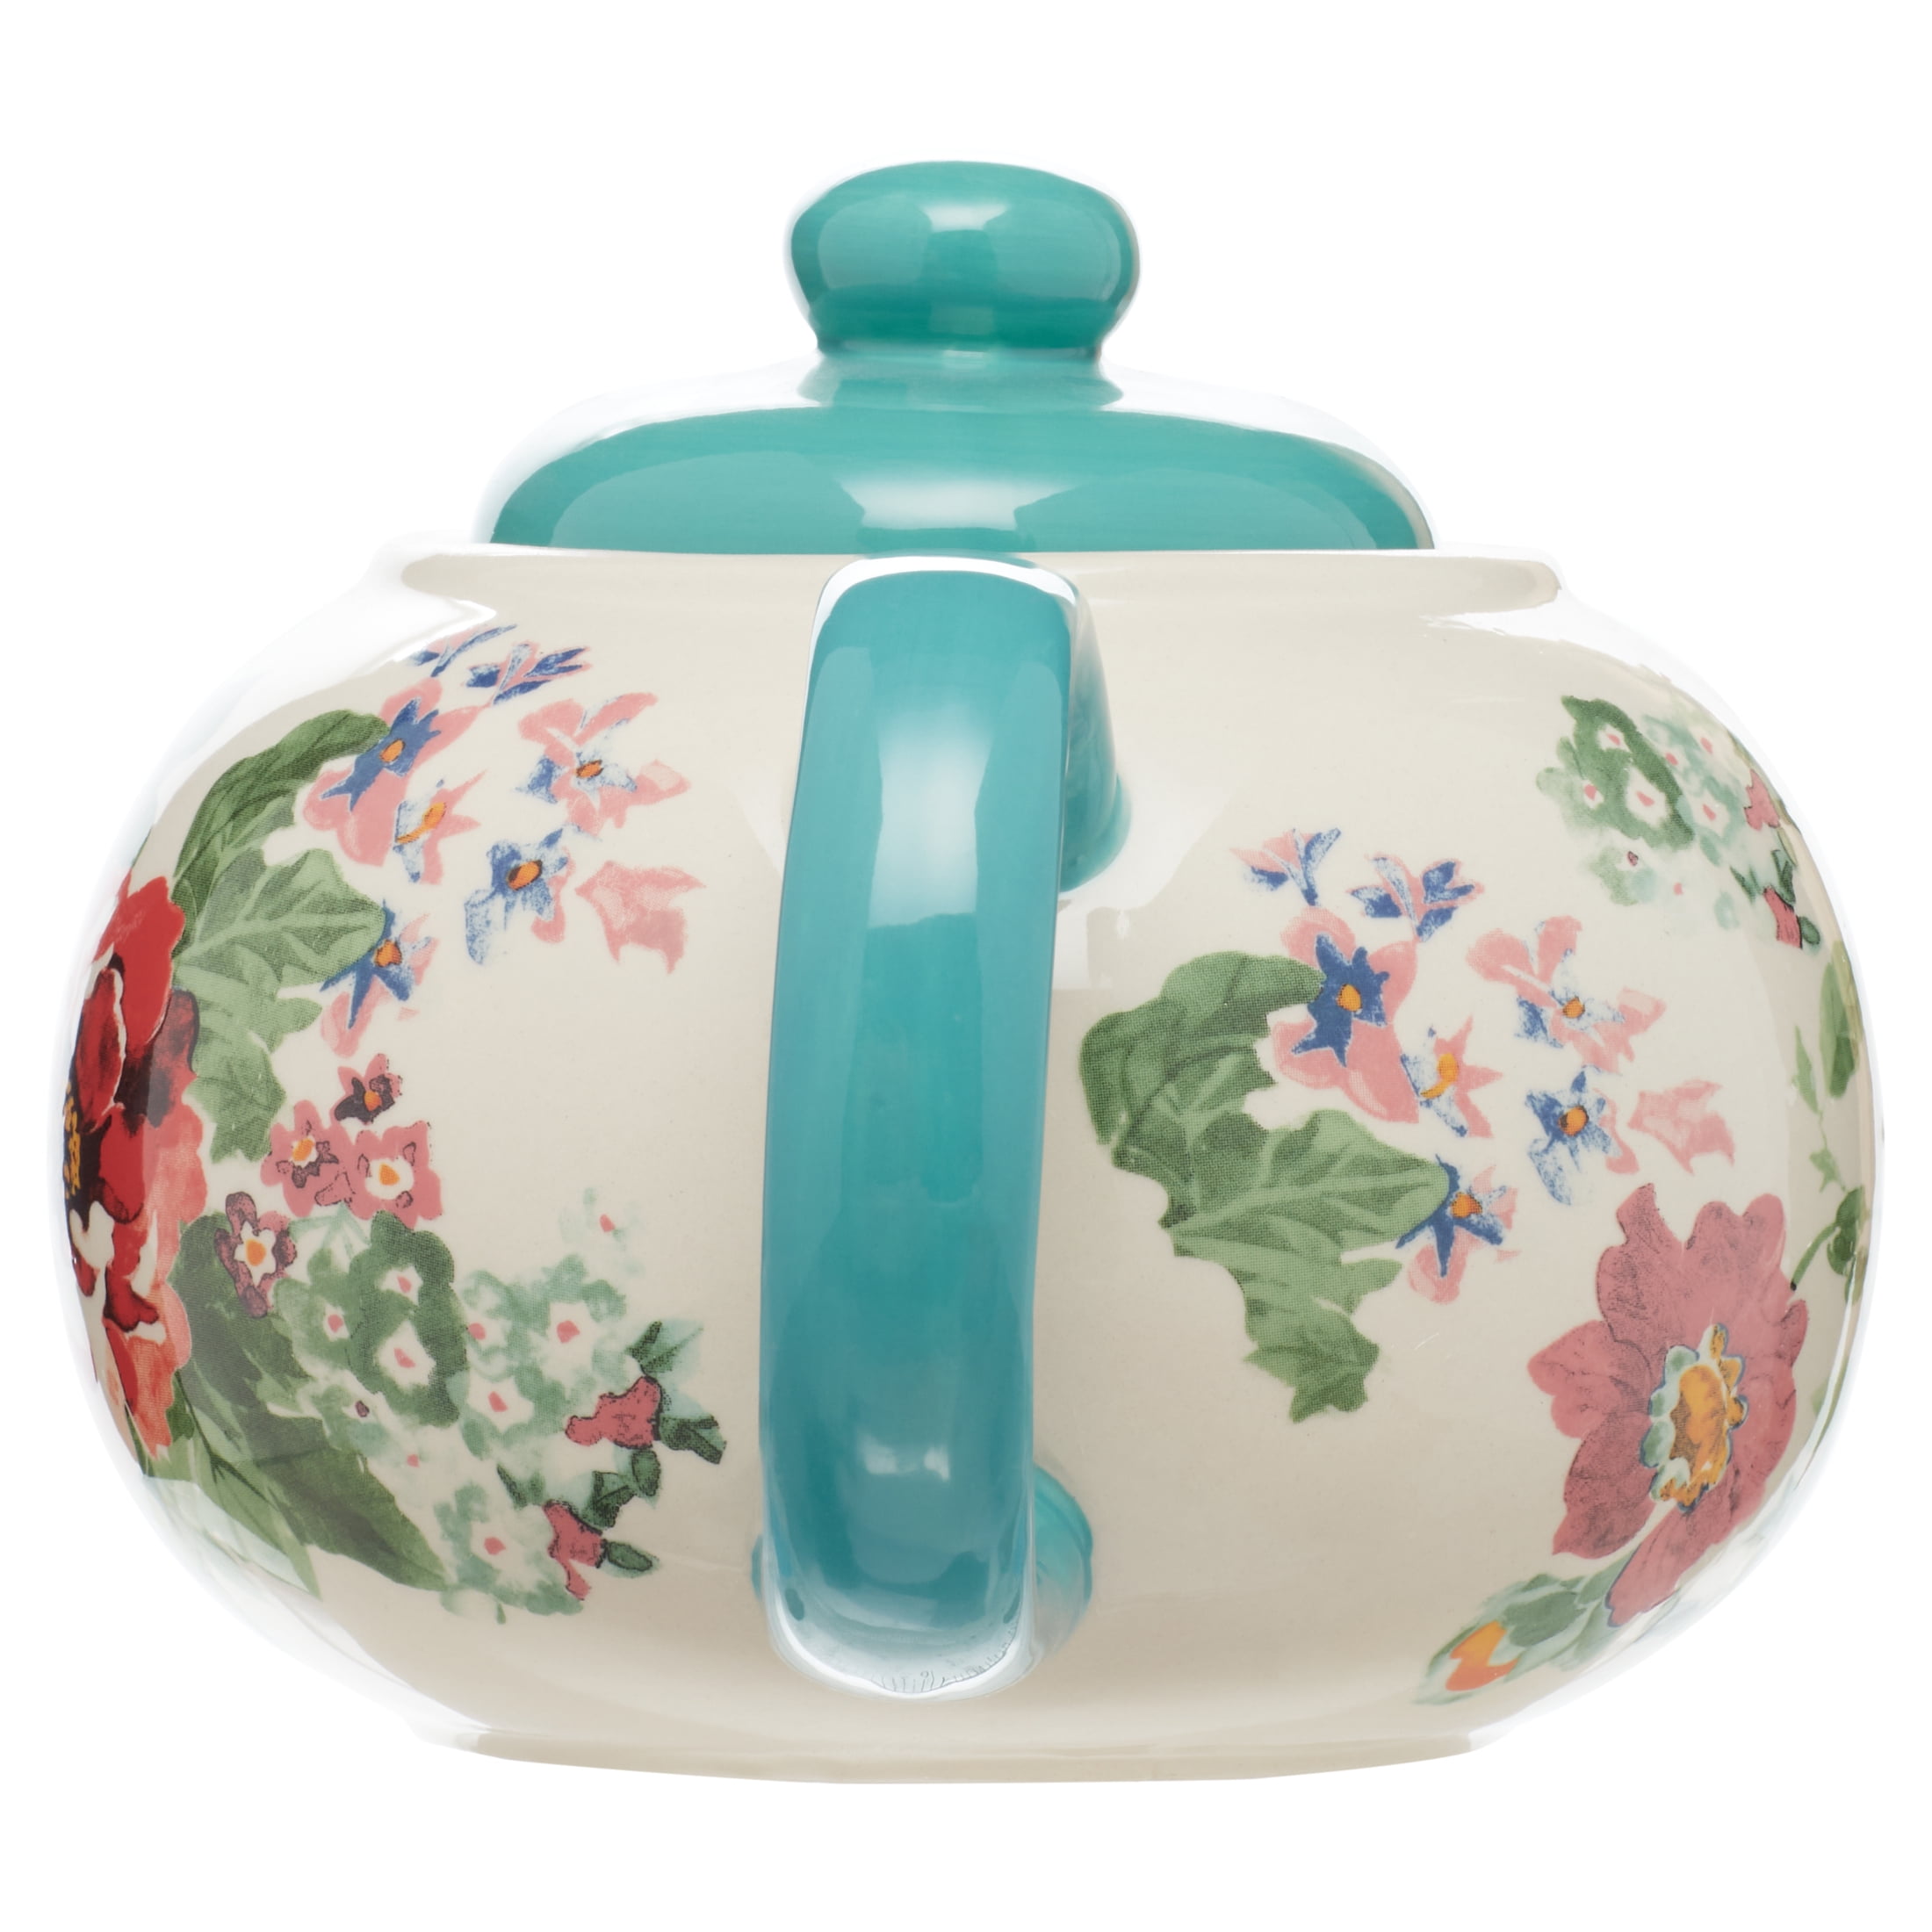 The Pioneer Woman Country Garden Teapot Microwave Safe 